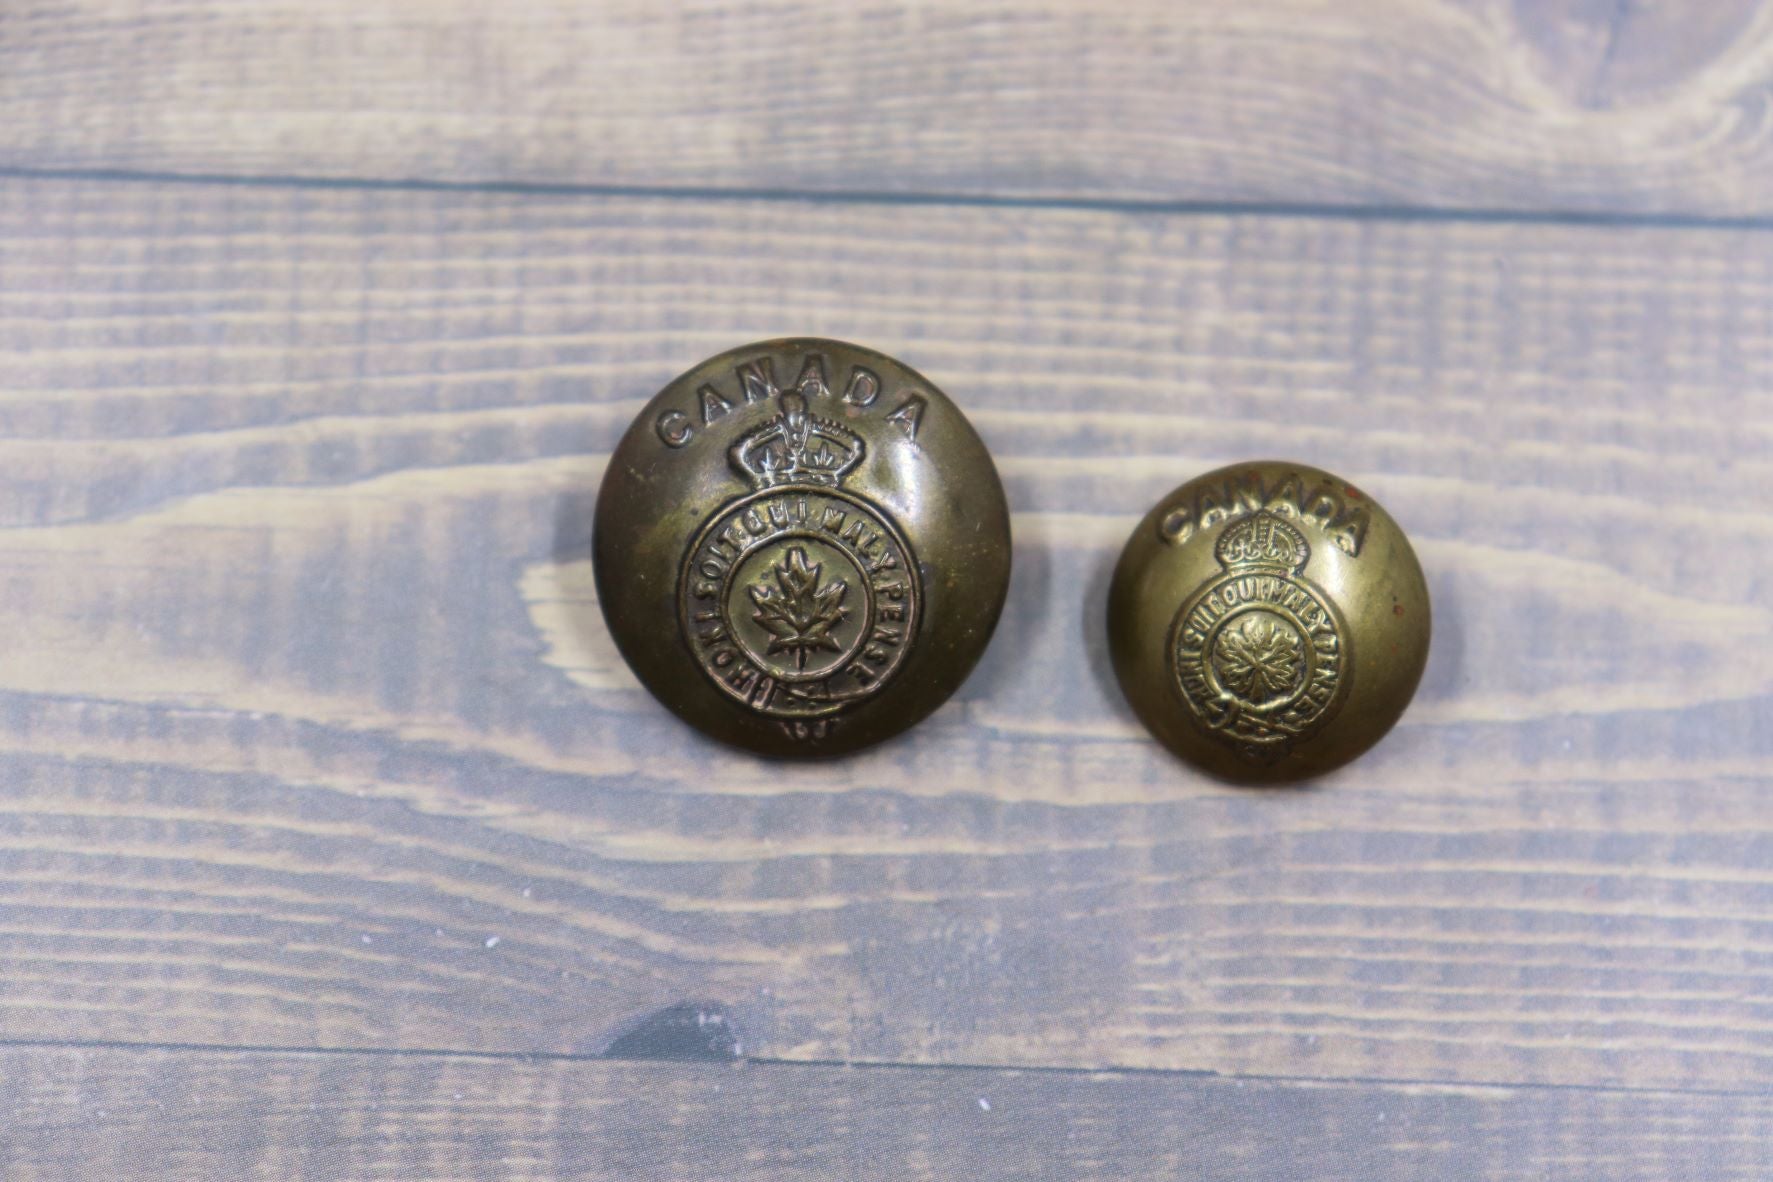 Vintage Canadian Military Buttons - General Service